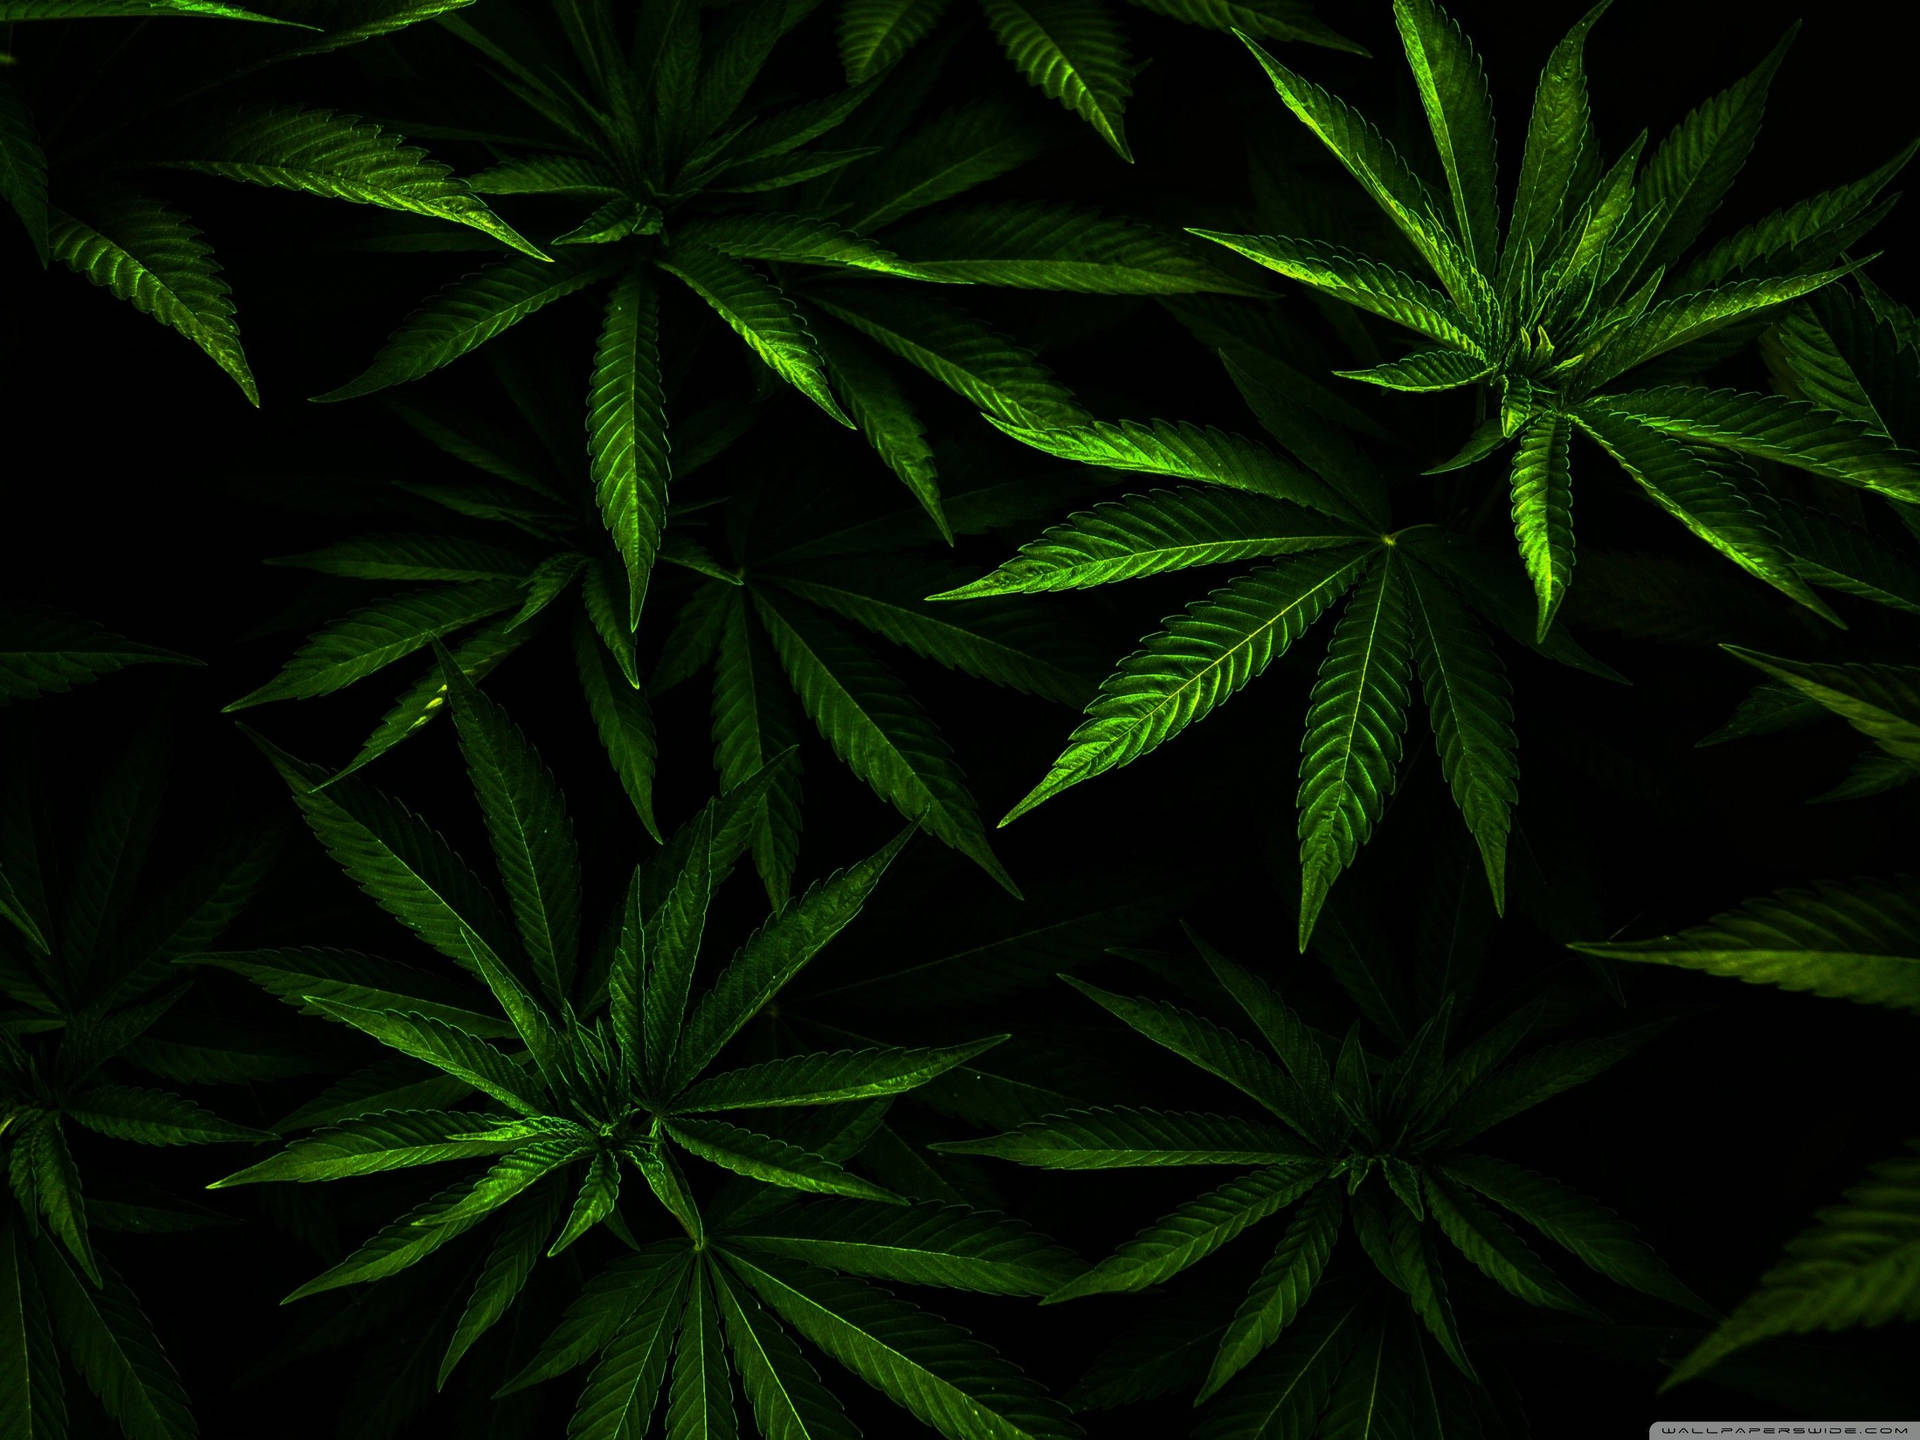 Free Cannabis Wallpaper Downloads, [100+] Cannabis Wallpapers for FREE |  